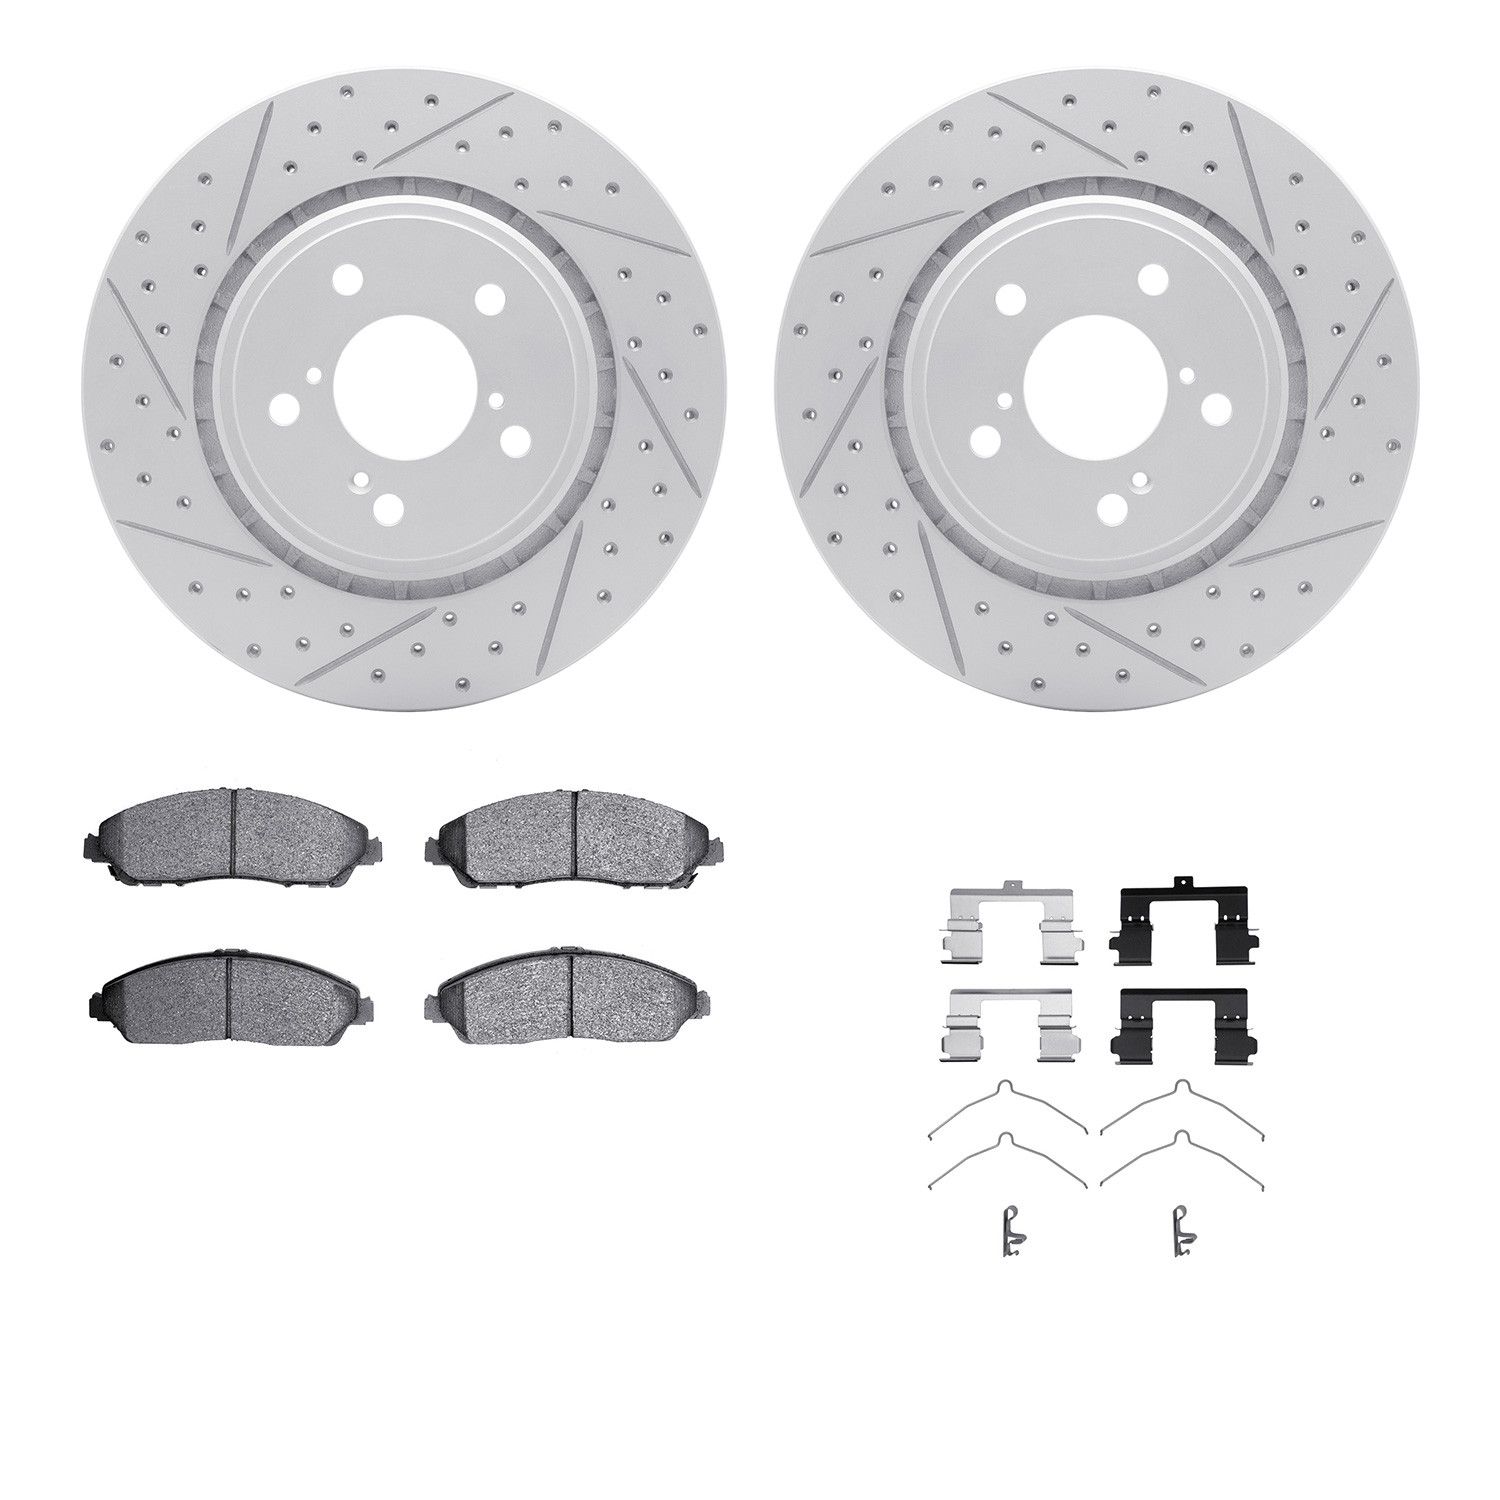 2512-59082 Geoperformance Drilled/Slotted Rotors w/5000 Advanced Brake Pads Kit & Hardware, Fits Select Acura/Honda, Position: F